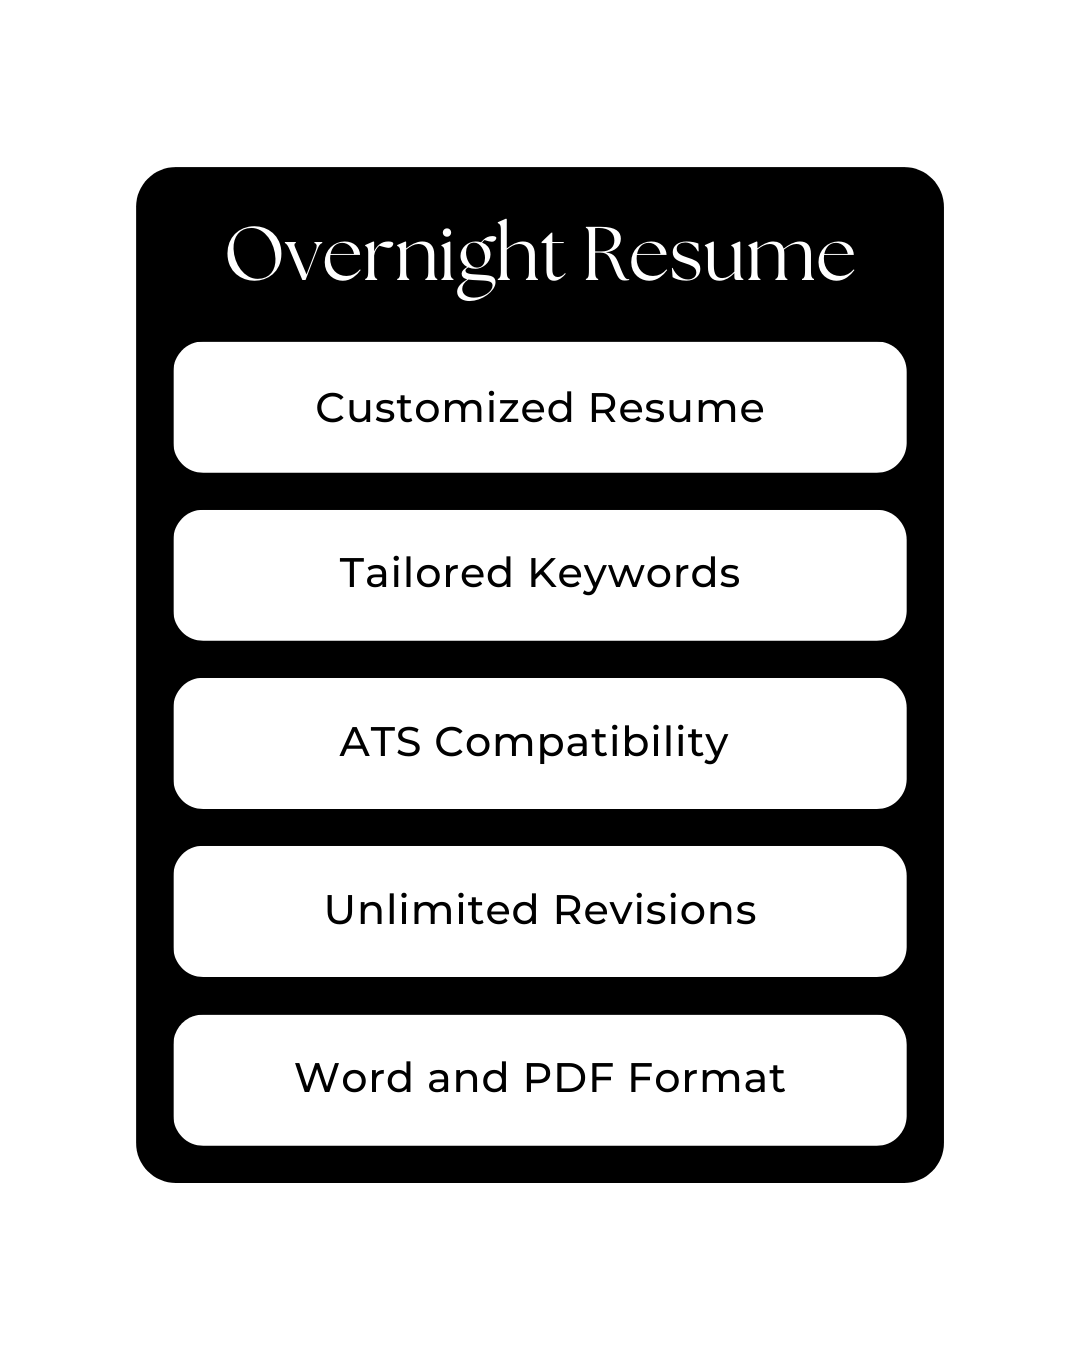 Overnight Resume - 24-hour Delivery! Monday - Thursday (Must order before 12:00 pm)